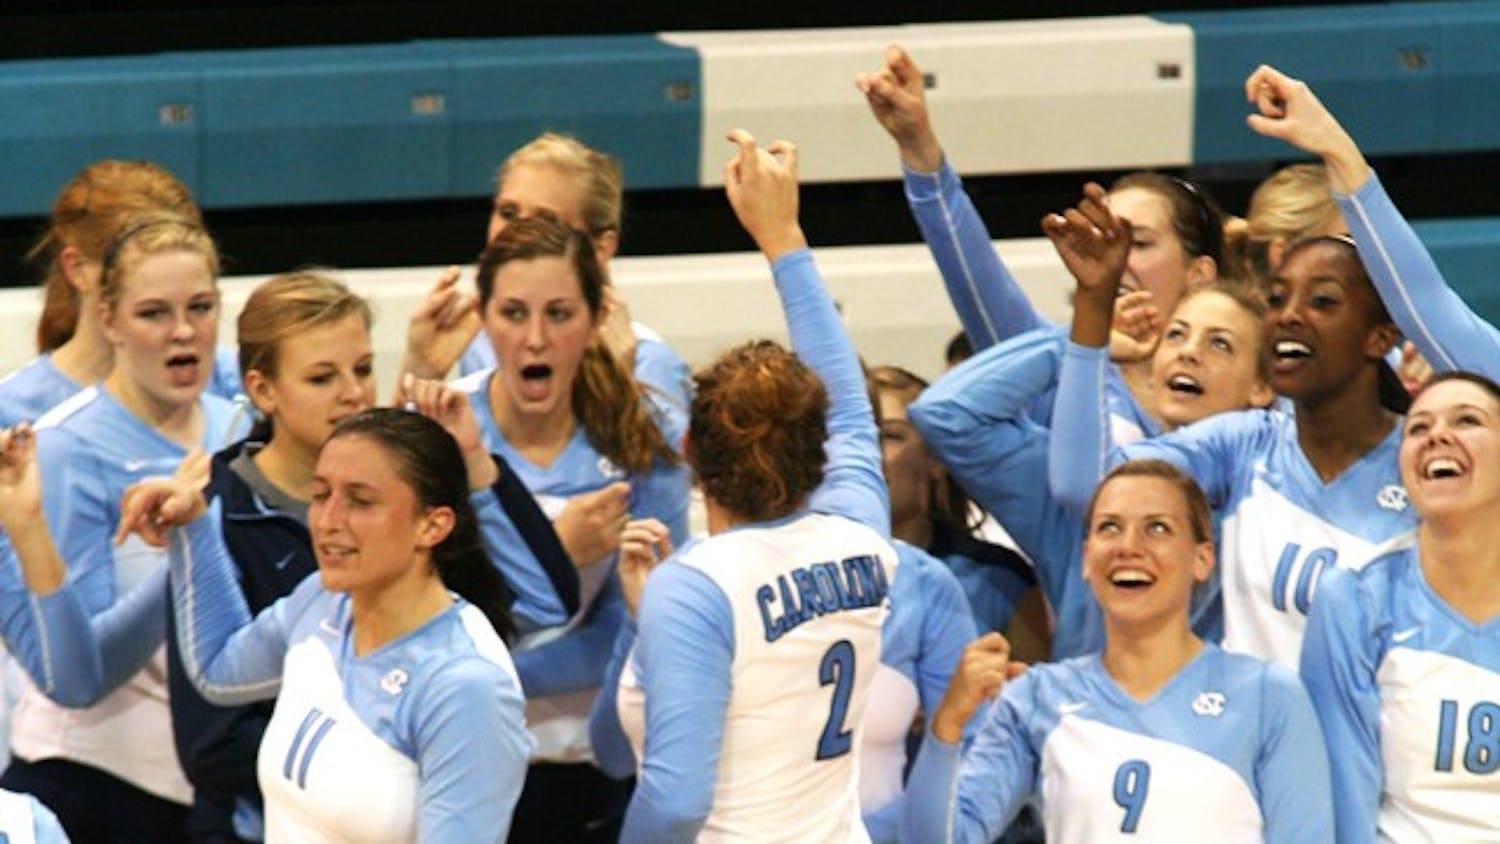 UNC volleyball players meet in their pregame routine before matches. The women use celebrations as way to increase energy during the games.